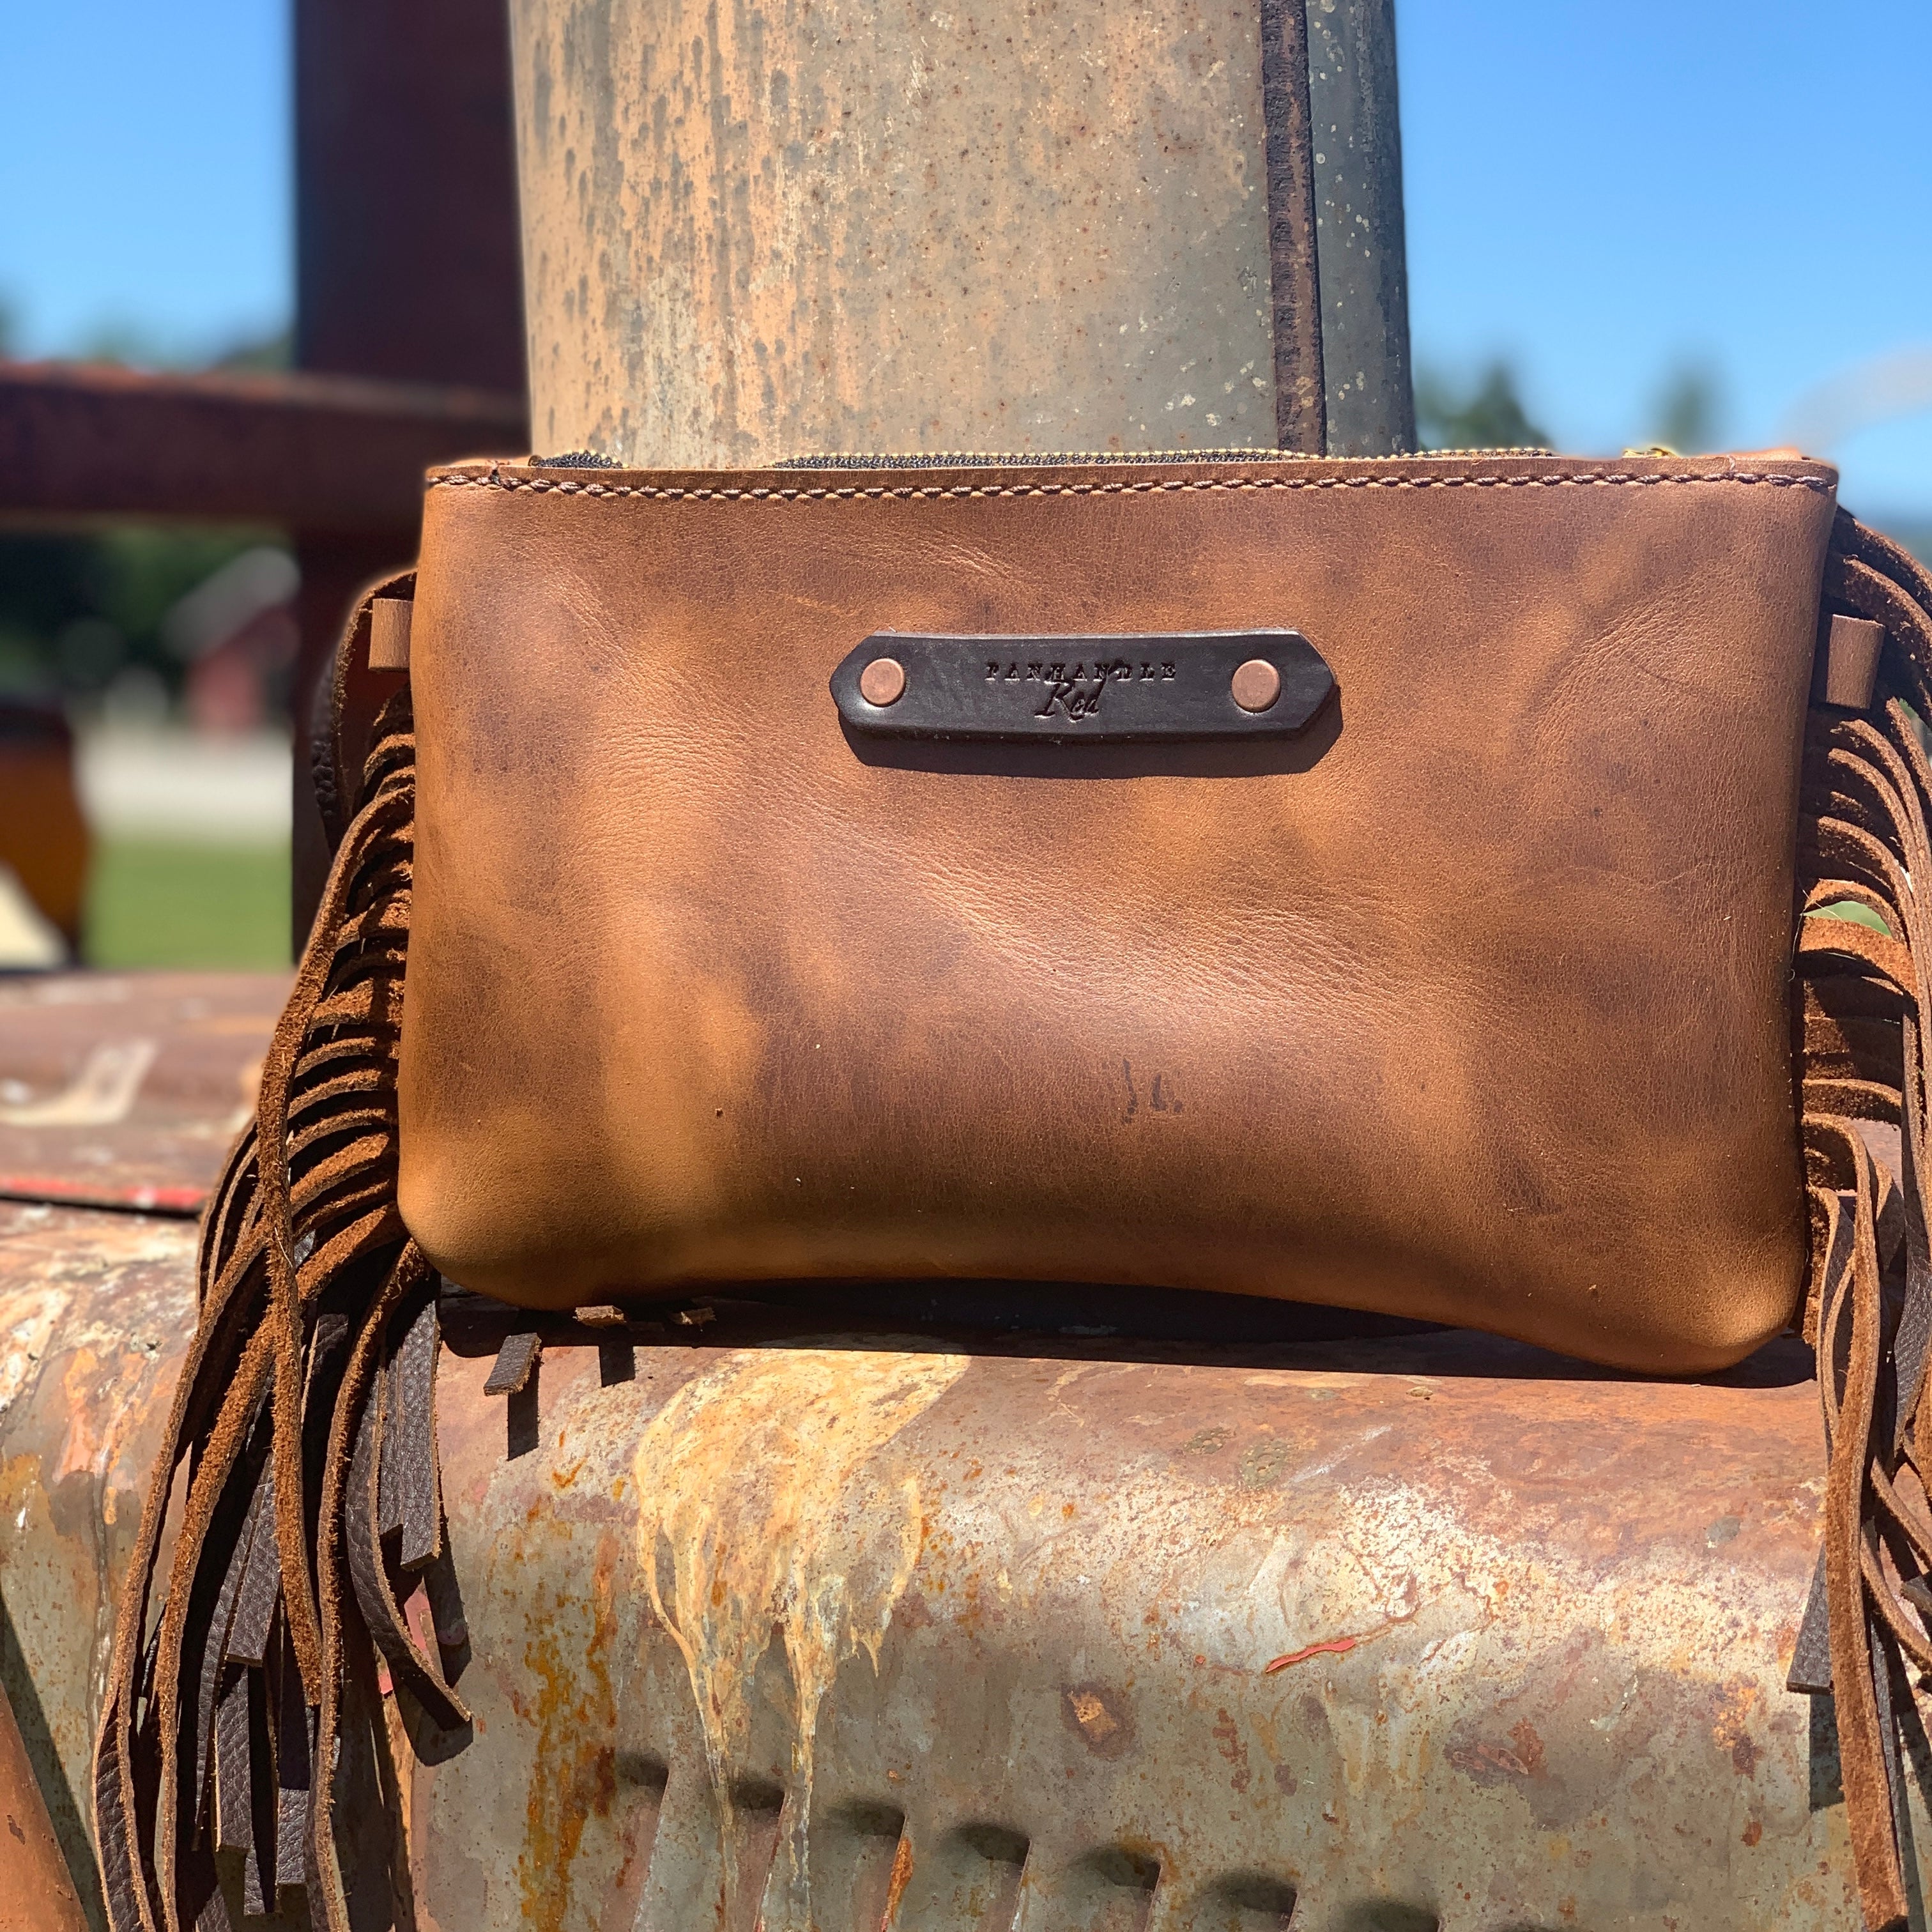 Black Leather Tote Bag by Panhandle Red Leather Company, North Idaho